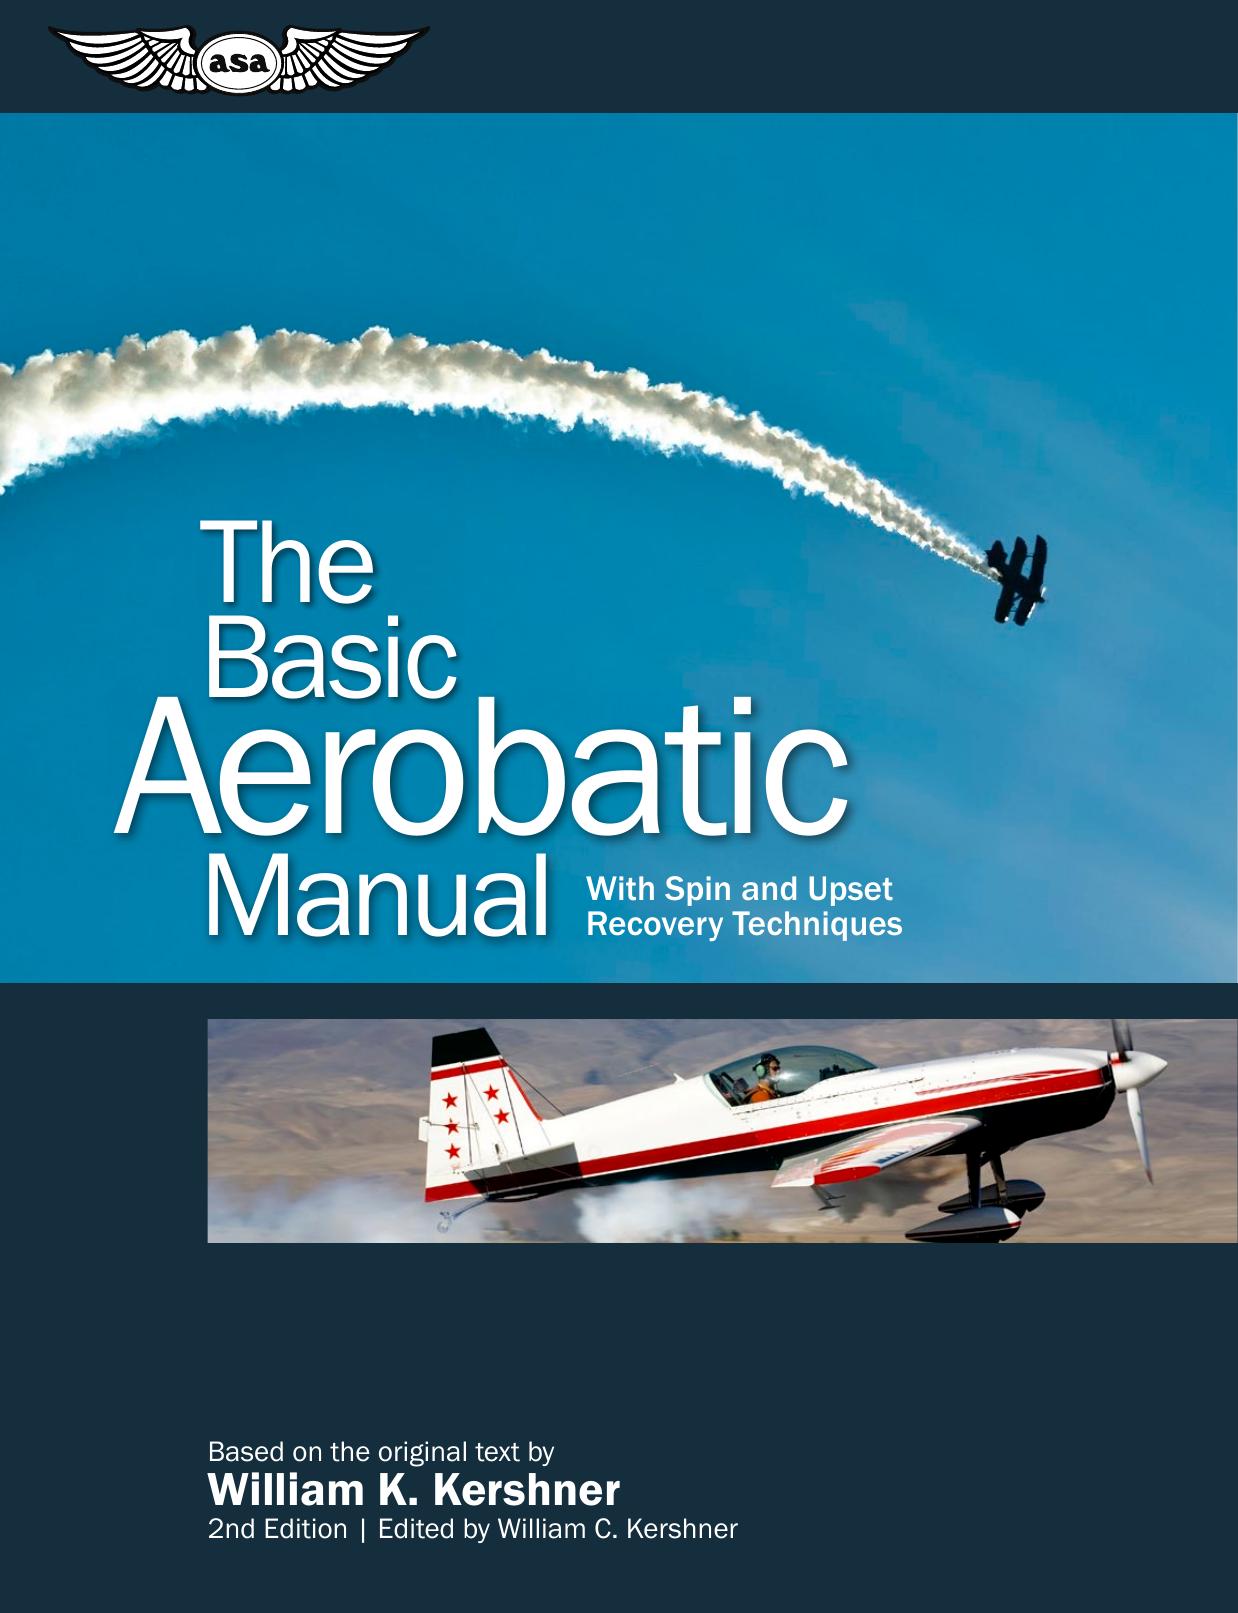 The Basic Aerobatic Manual: With Spin and Upset Recovery Techniques by William K. Kershner; William C. Kershner